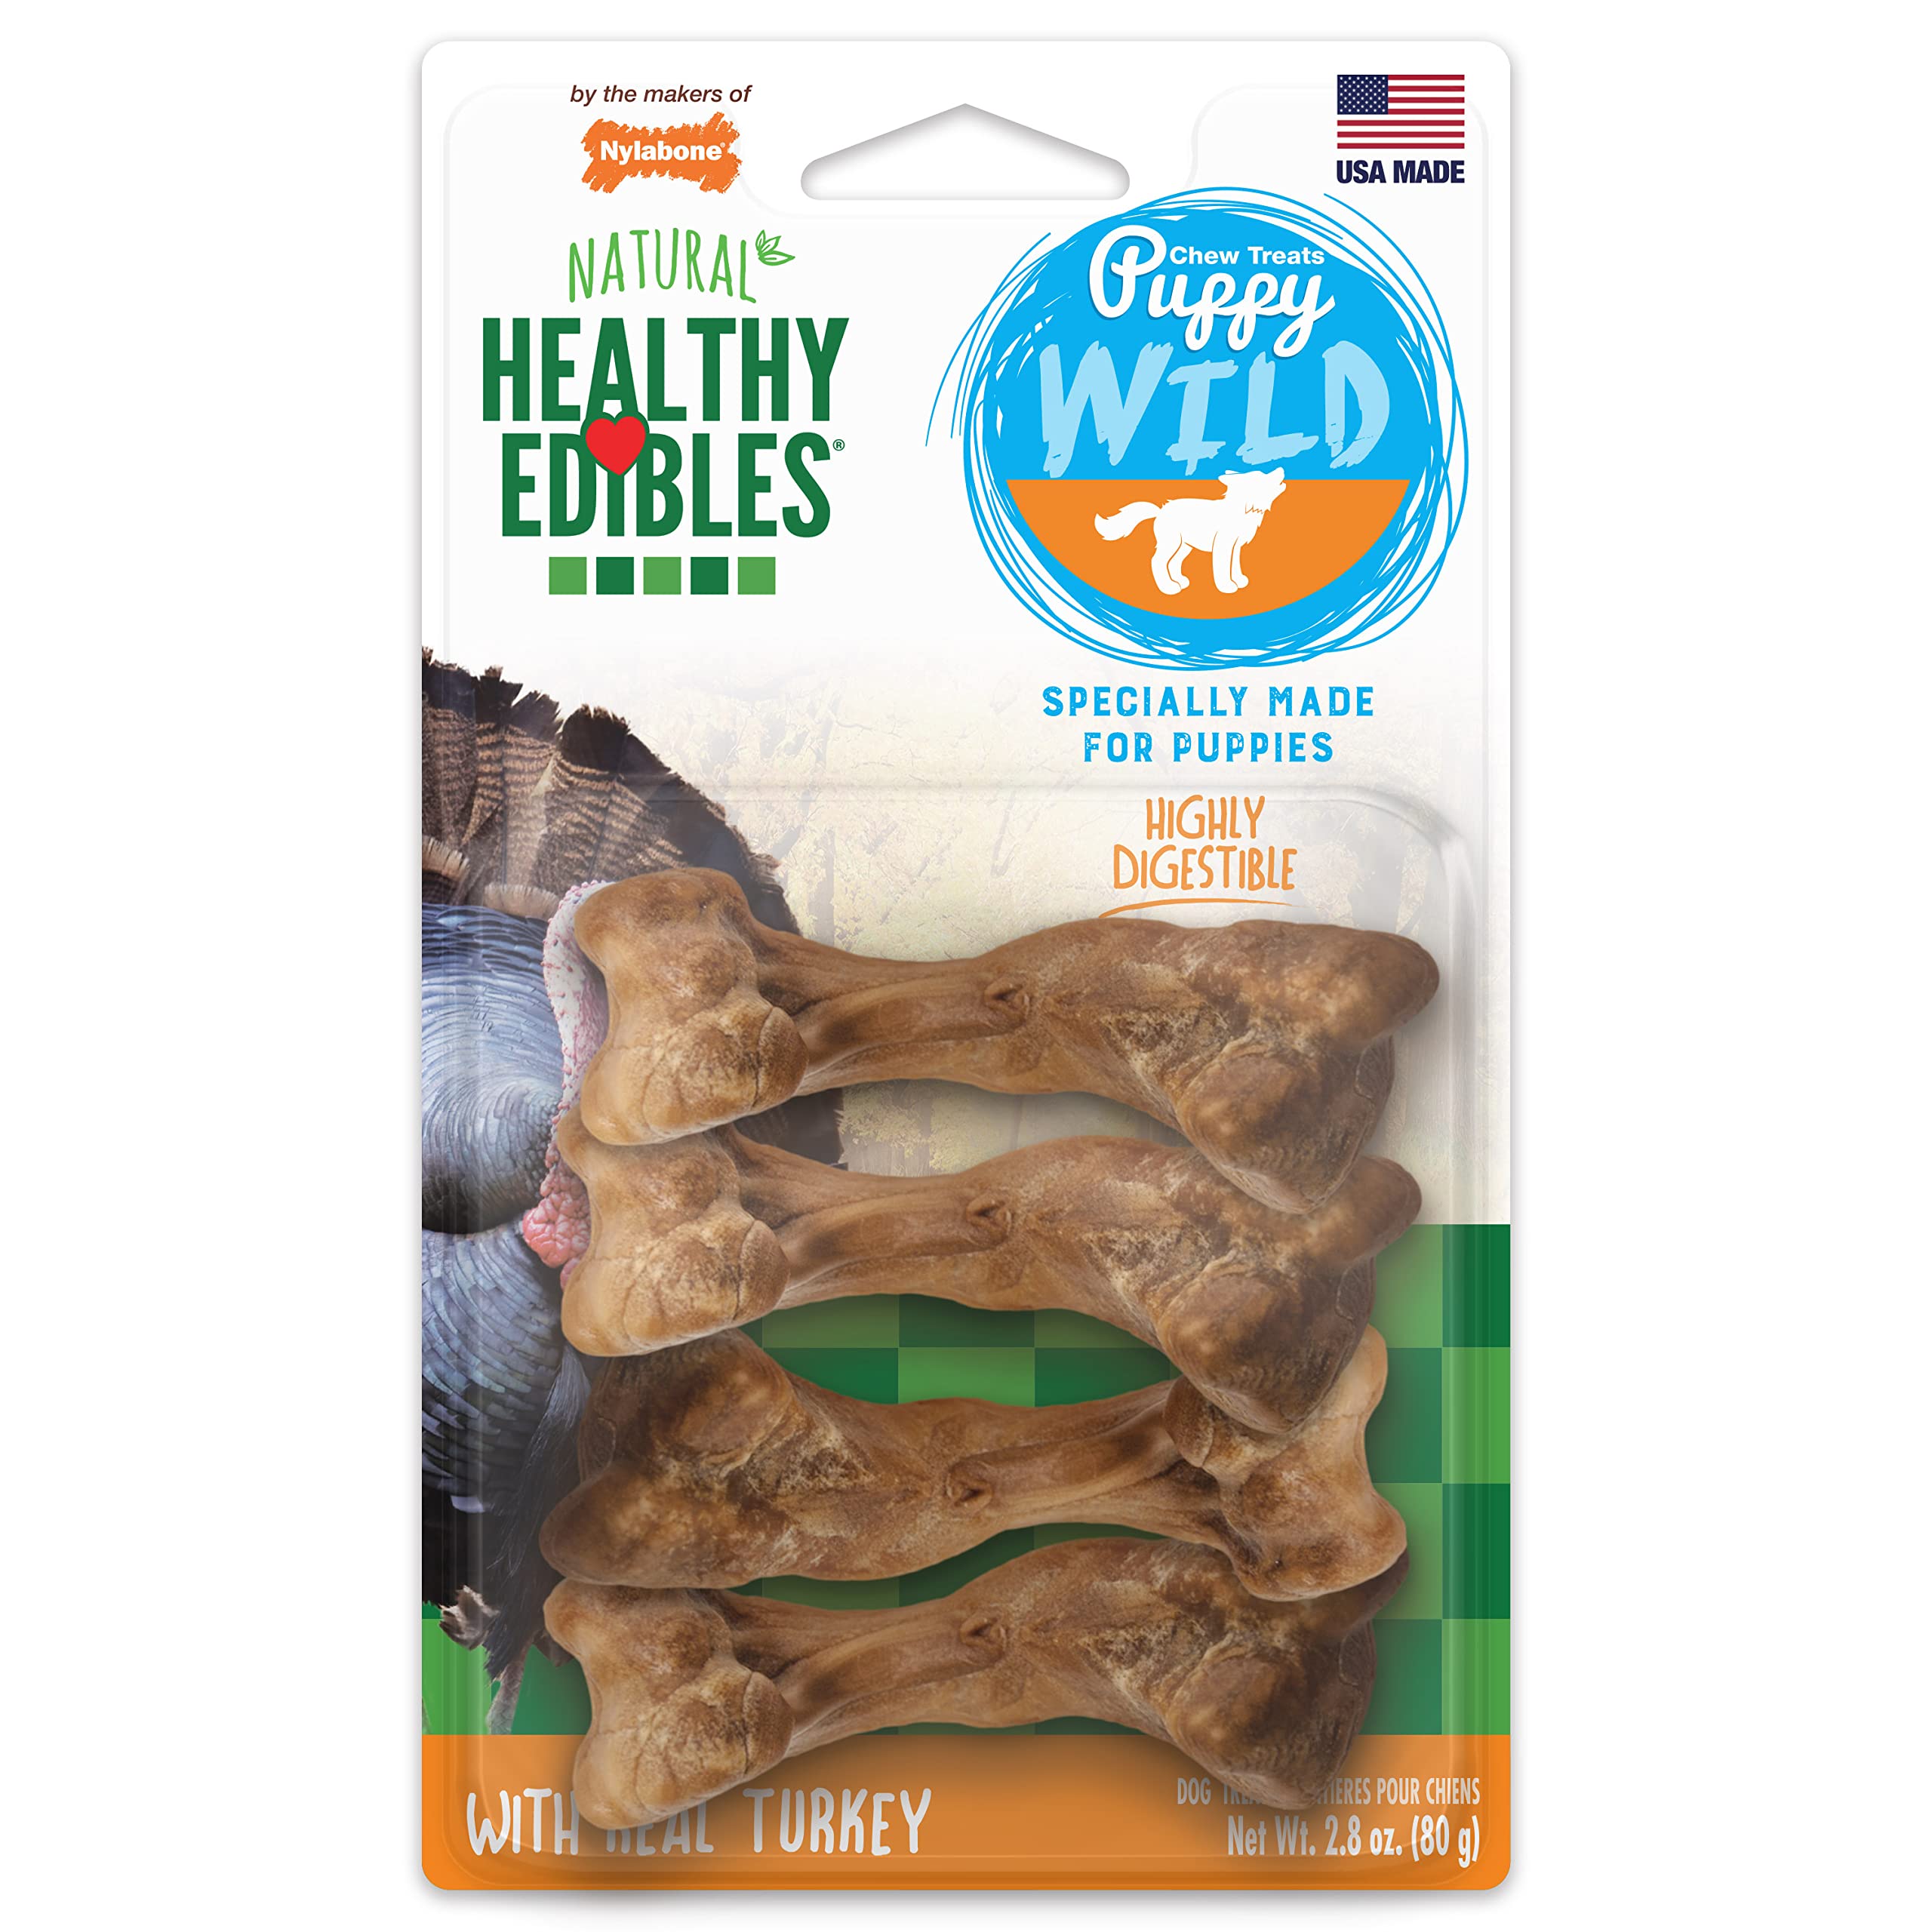 4-Count Nylabone Healthy Edibles Wild Puppy Dog Treats (Turkey) $3.70 w/ S&S + Free Shipping w/ Prime or on $25+